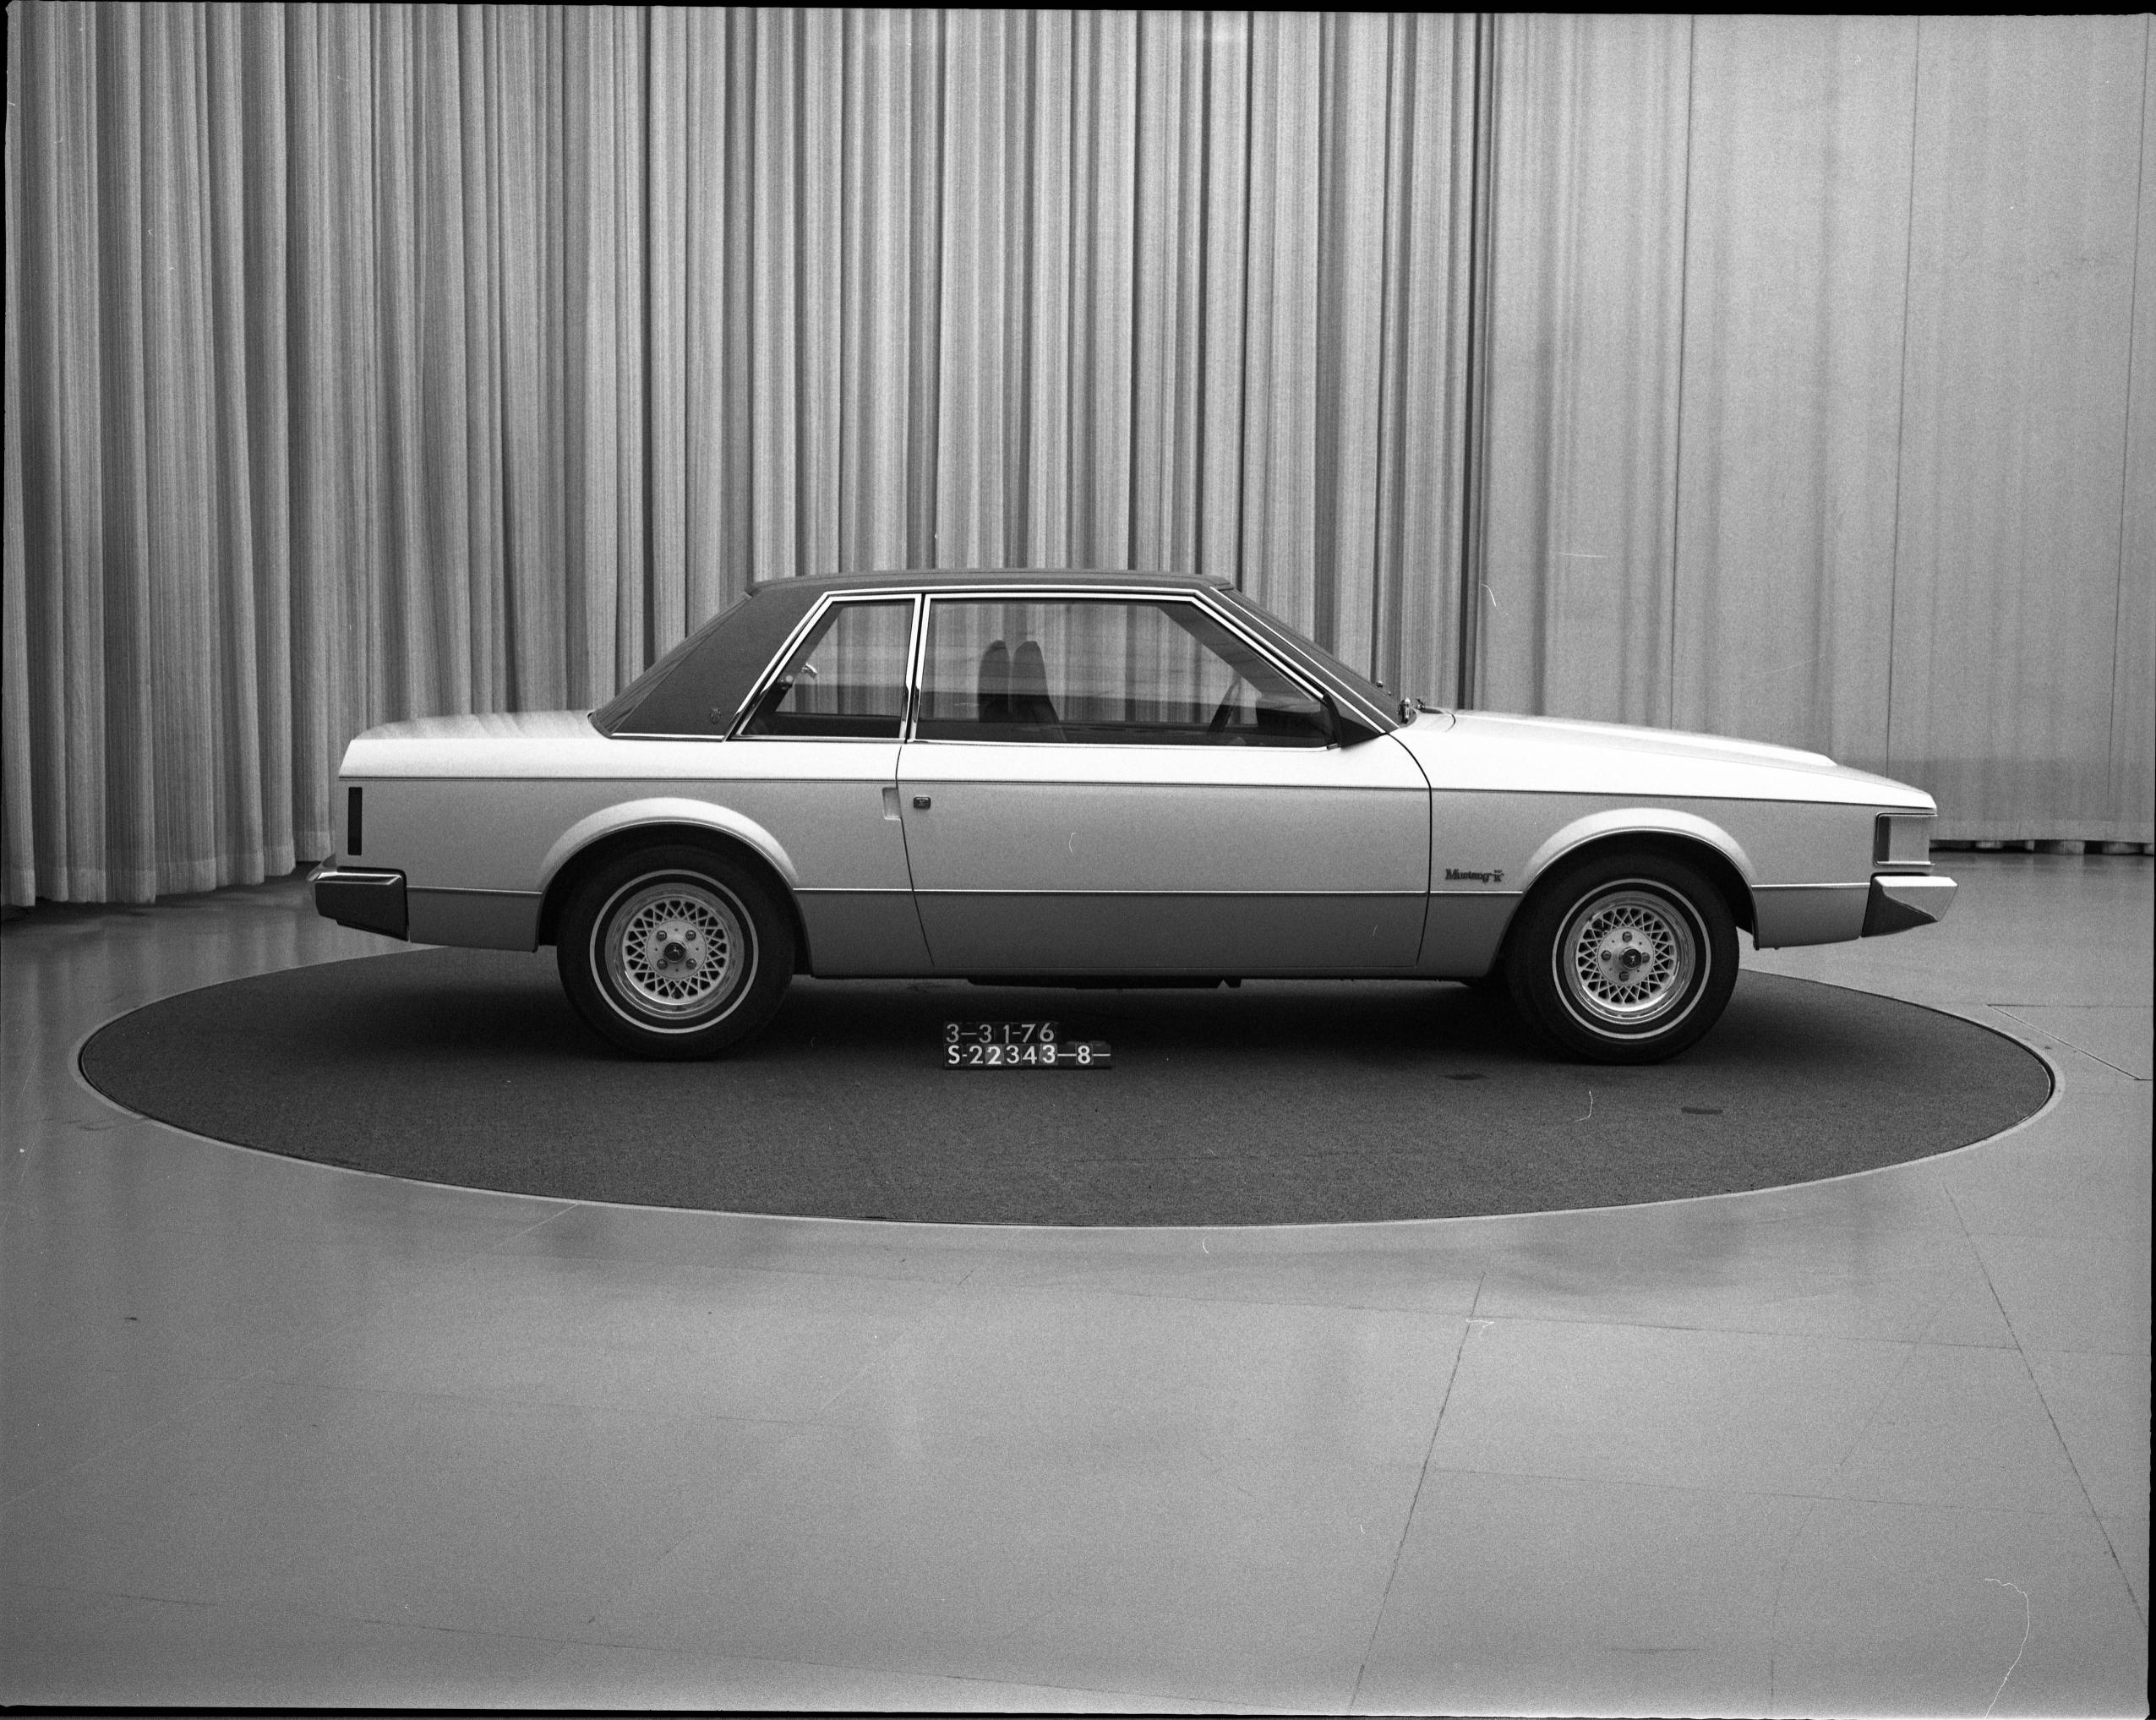 Another rather conservative design, and since it was the 1970s a vinyl roof concept was expected. This model uses much more chrome around the daylight opening and features unique door handles tucked into the back of the door and accessed via a recess on the body, similar to the 1989 Ford Probe